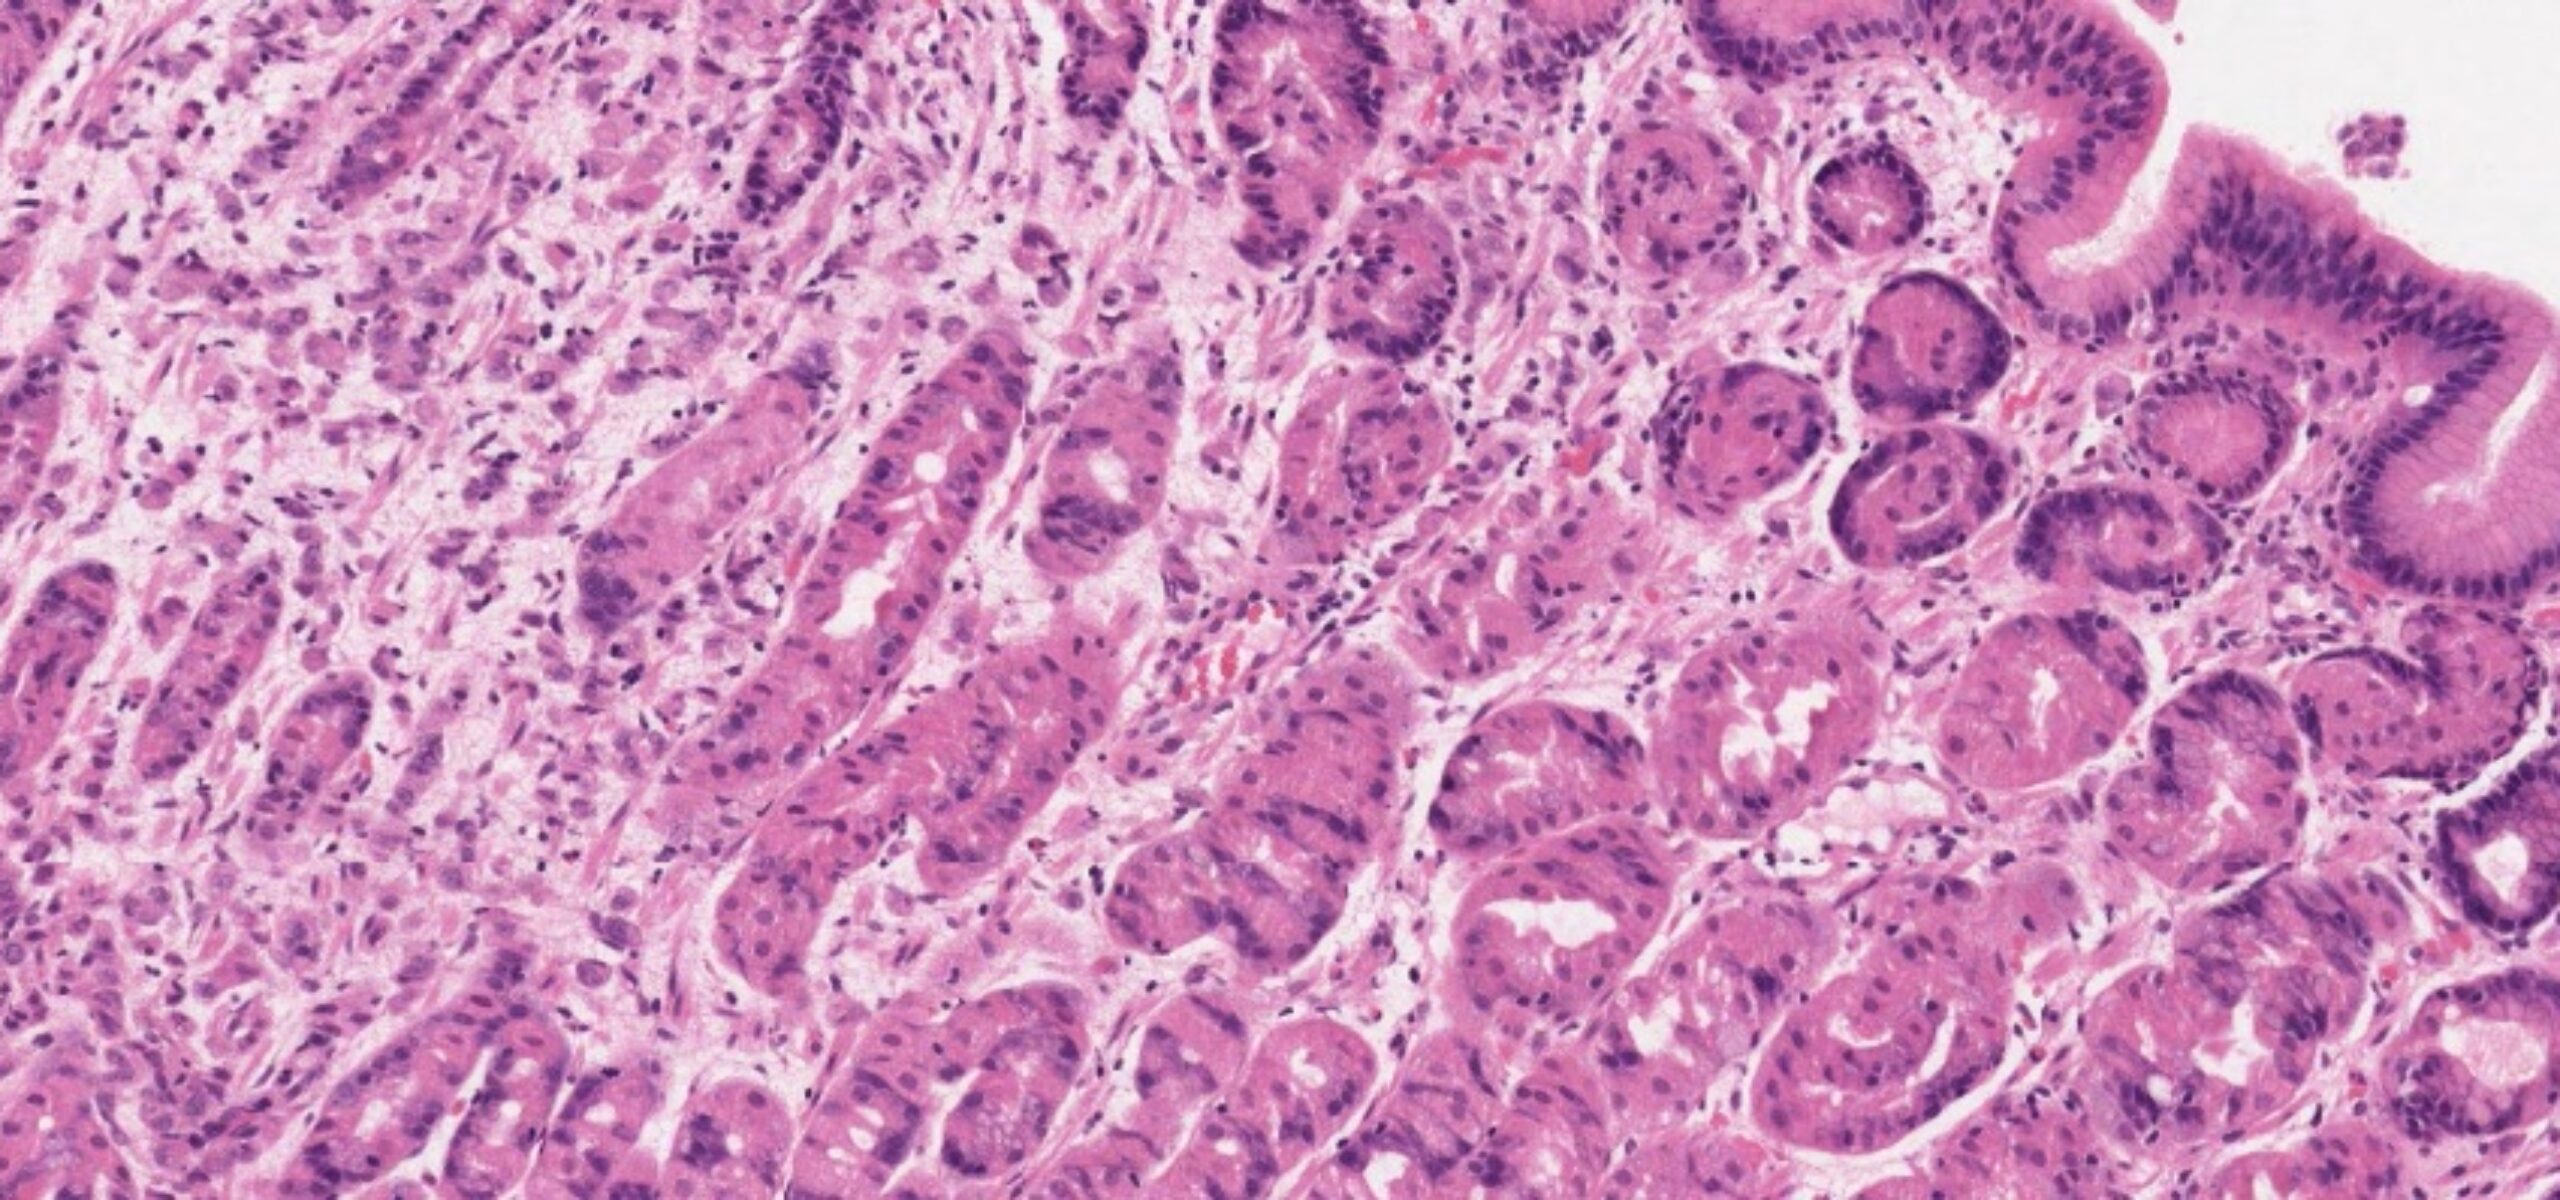 Haematoxylin and eosin stained gastric cancer under the microcope